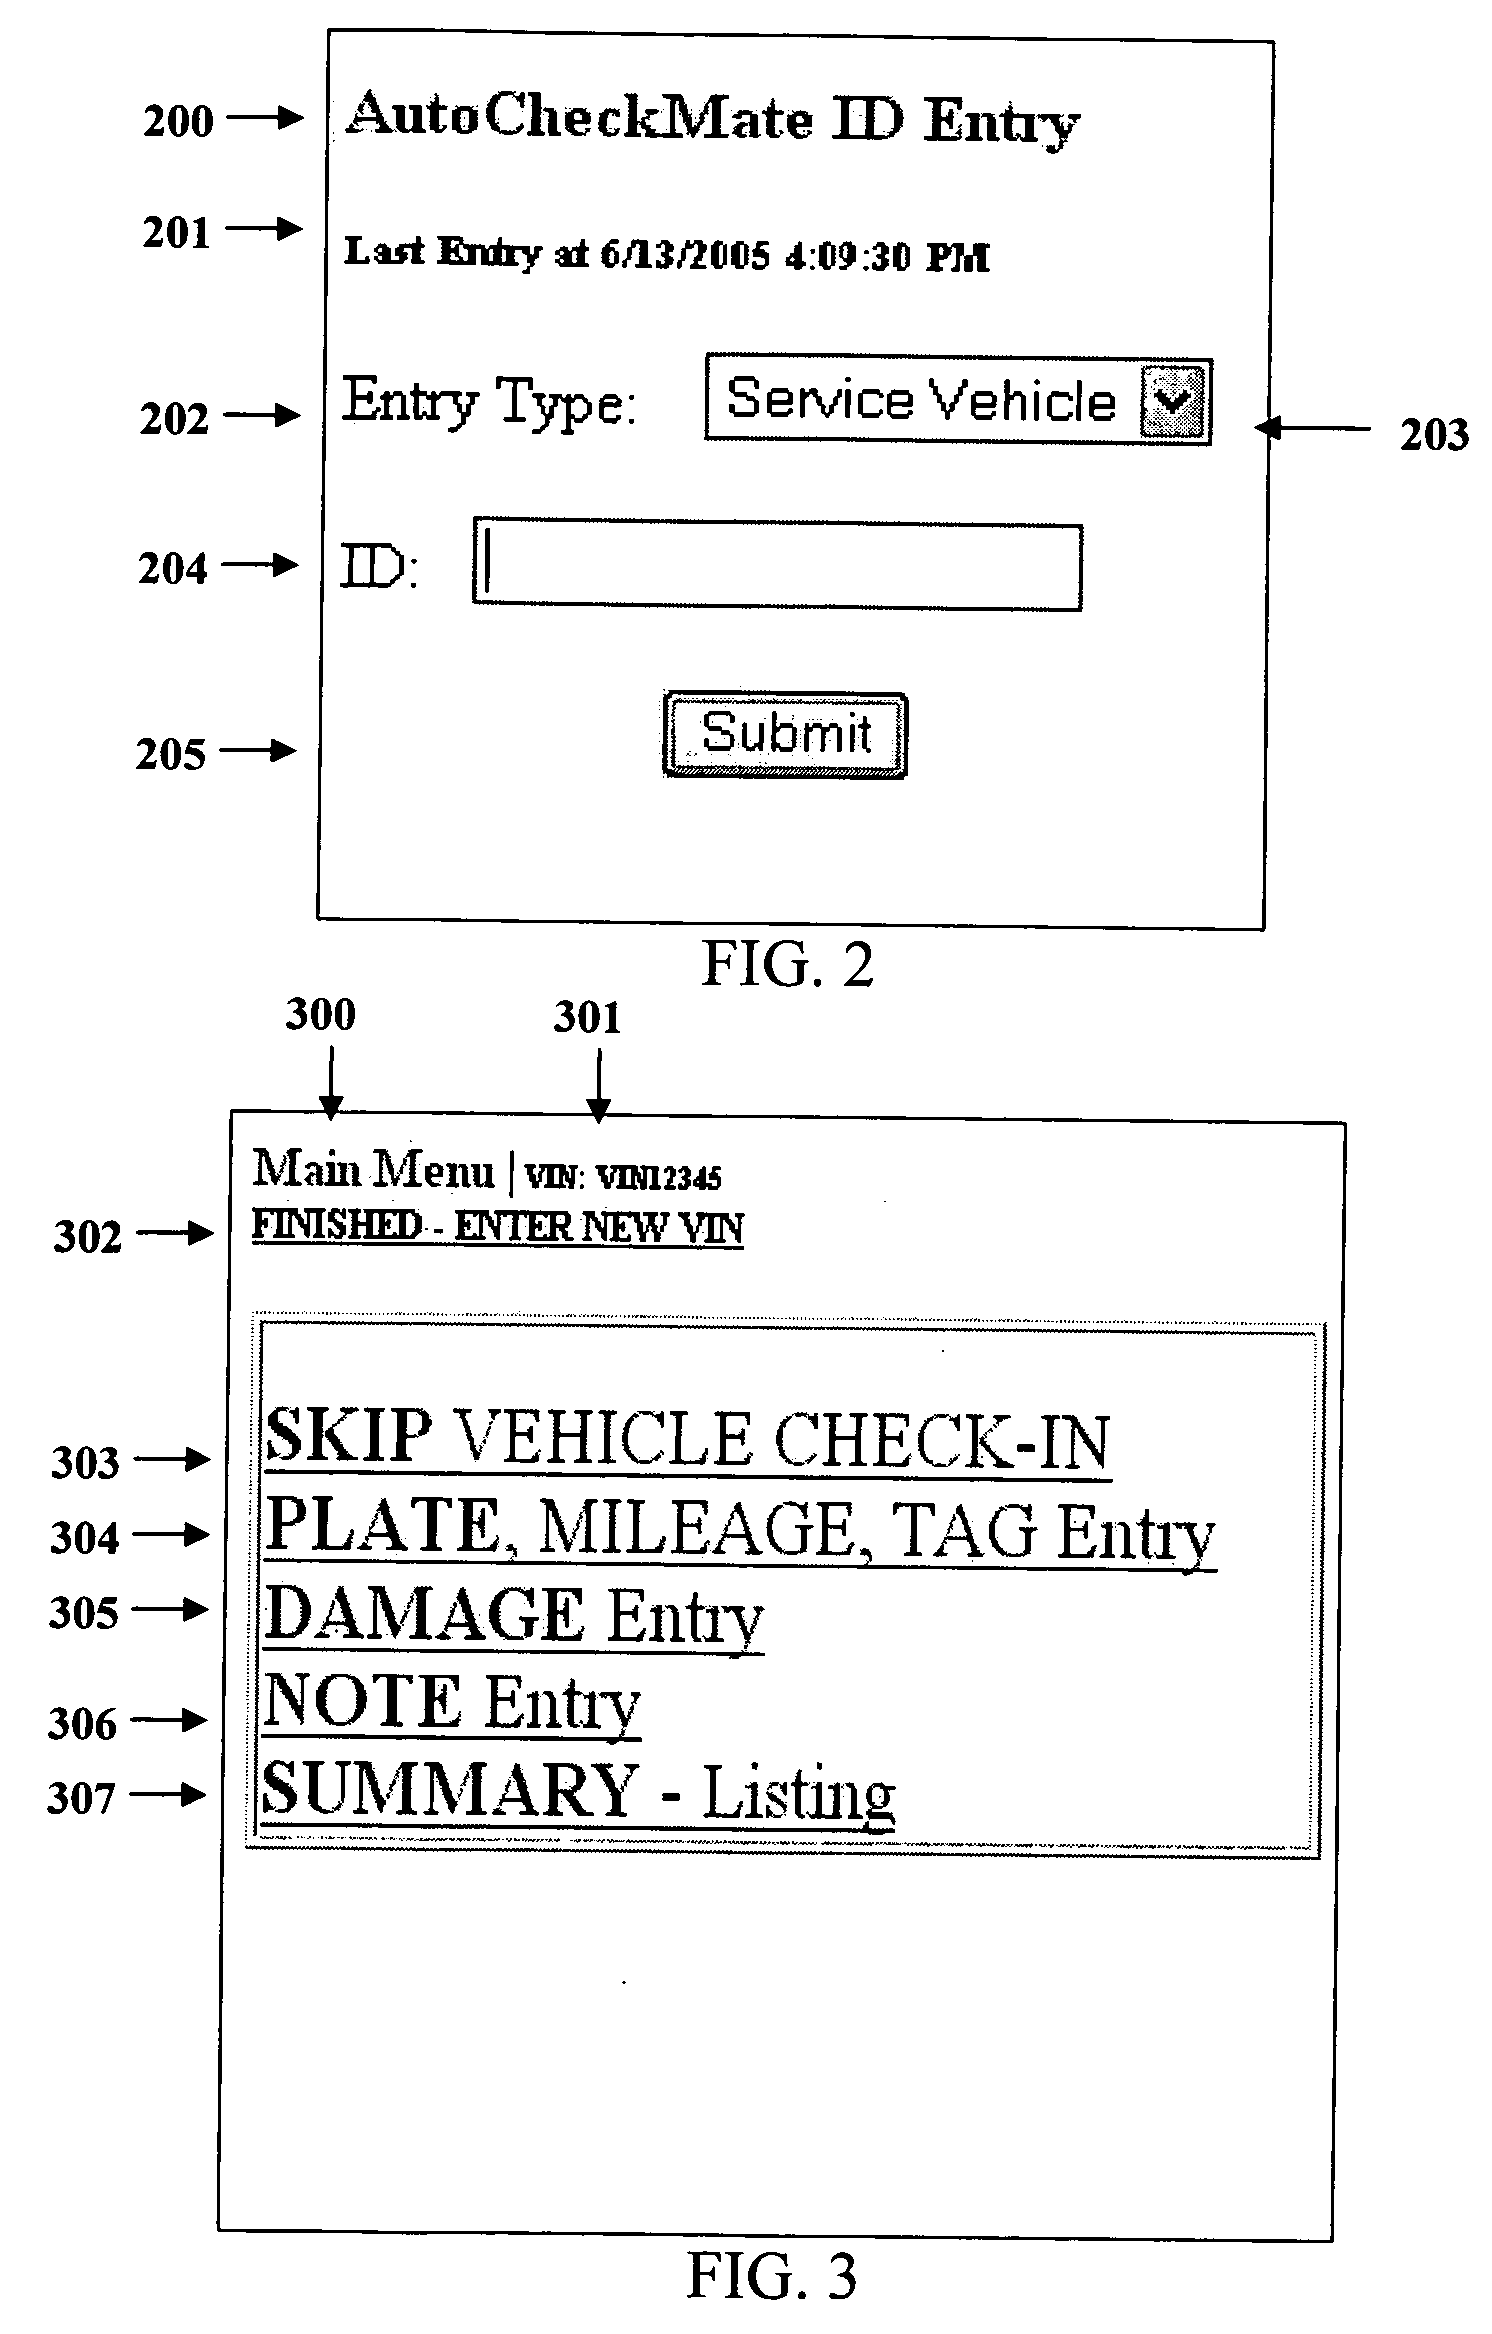 Automated vehicle check-in inspection method and system with digital image archiving